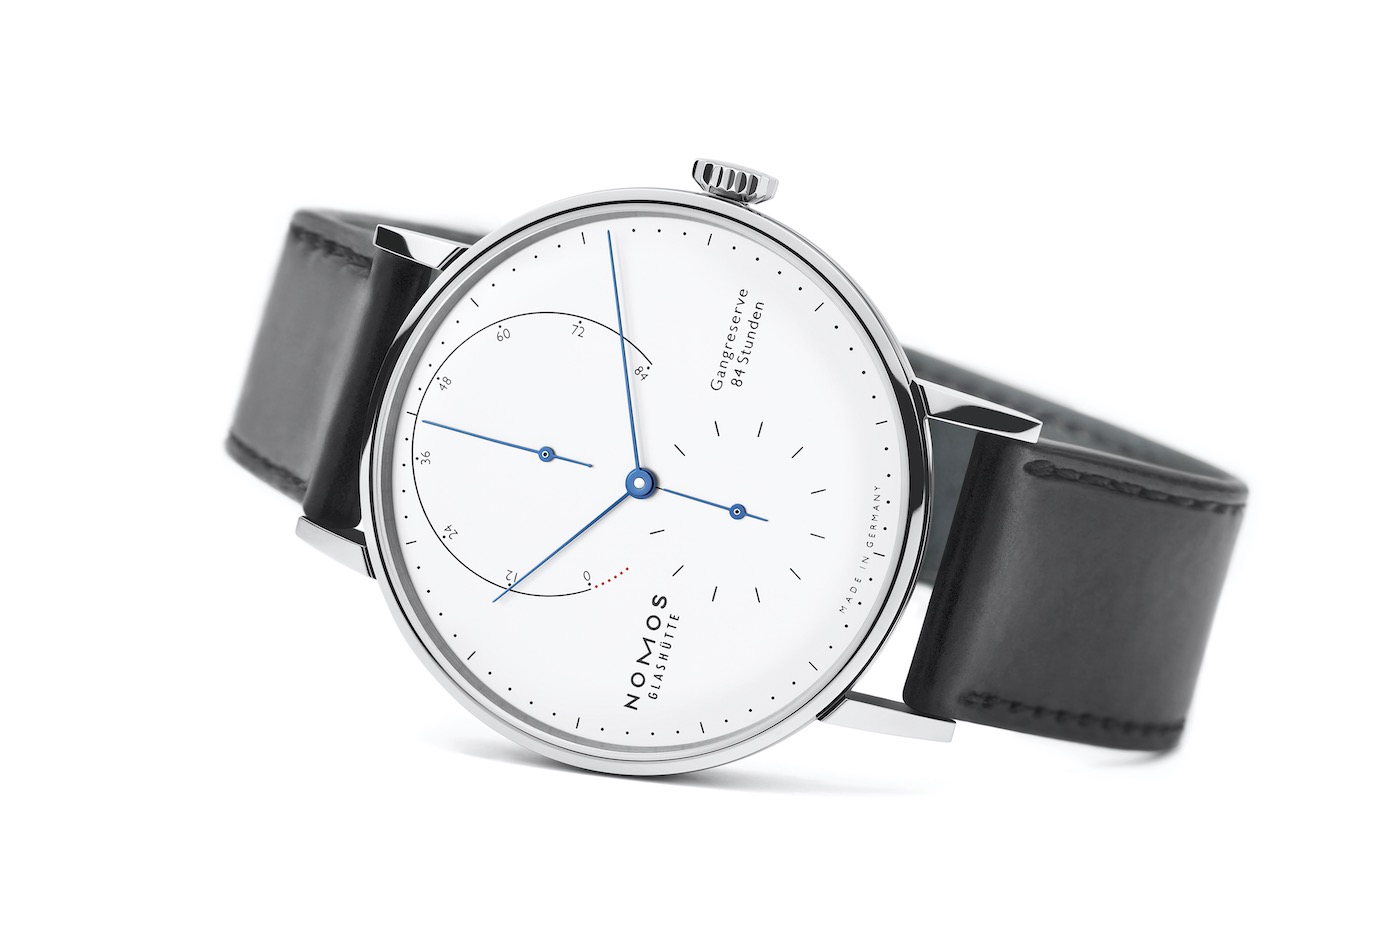 NOMOS Introduces a New Stainless Steel Lambda fake watches to Honor 175 Years of Glashütte Watchmaking Sponsored post 